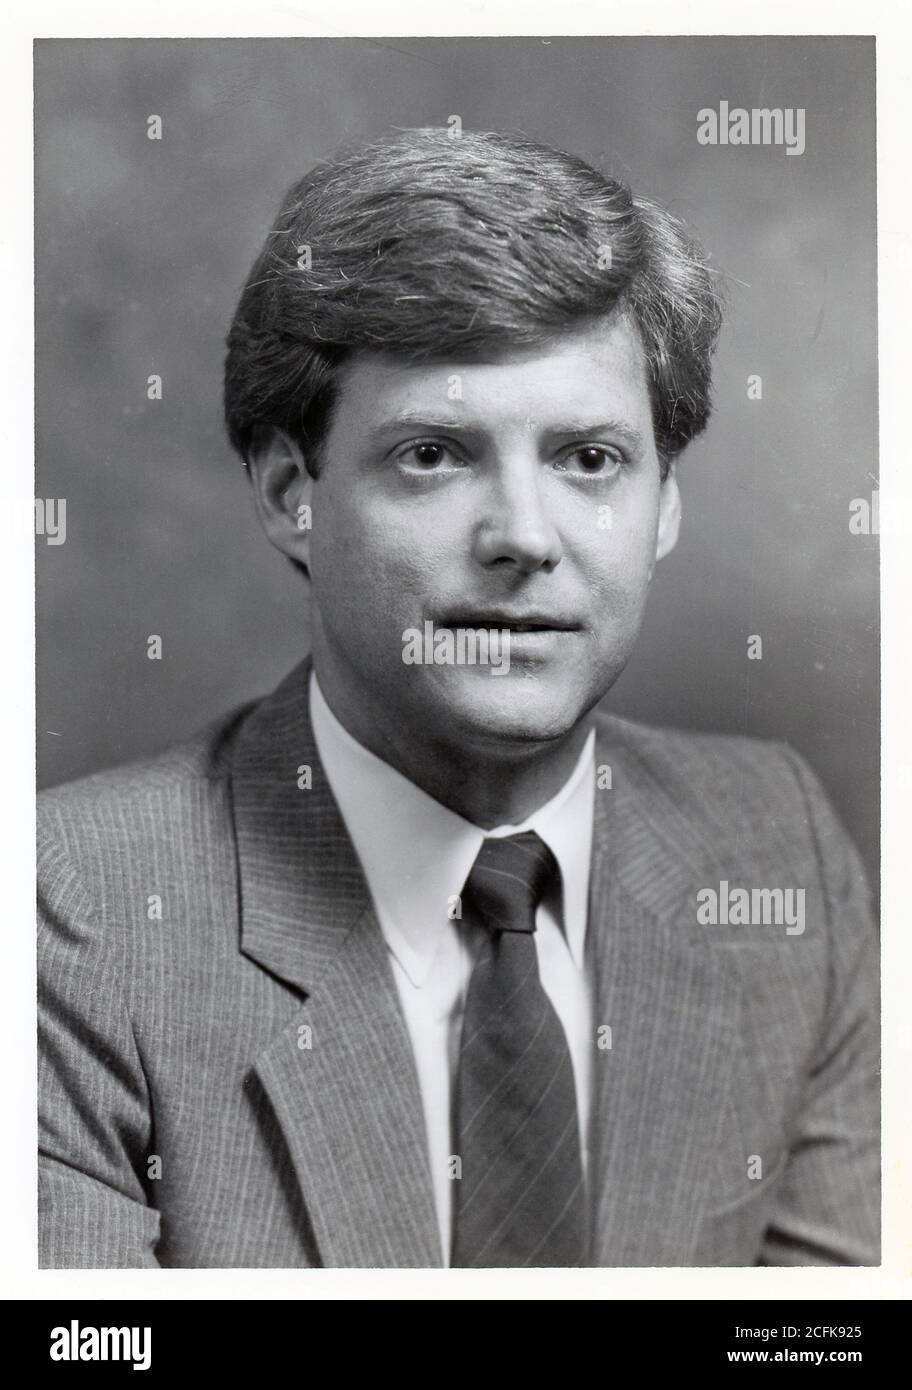 Formal business portrait of young businessman, 1980, USA Stock Photo